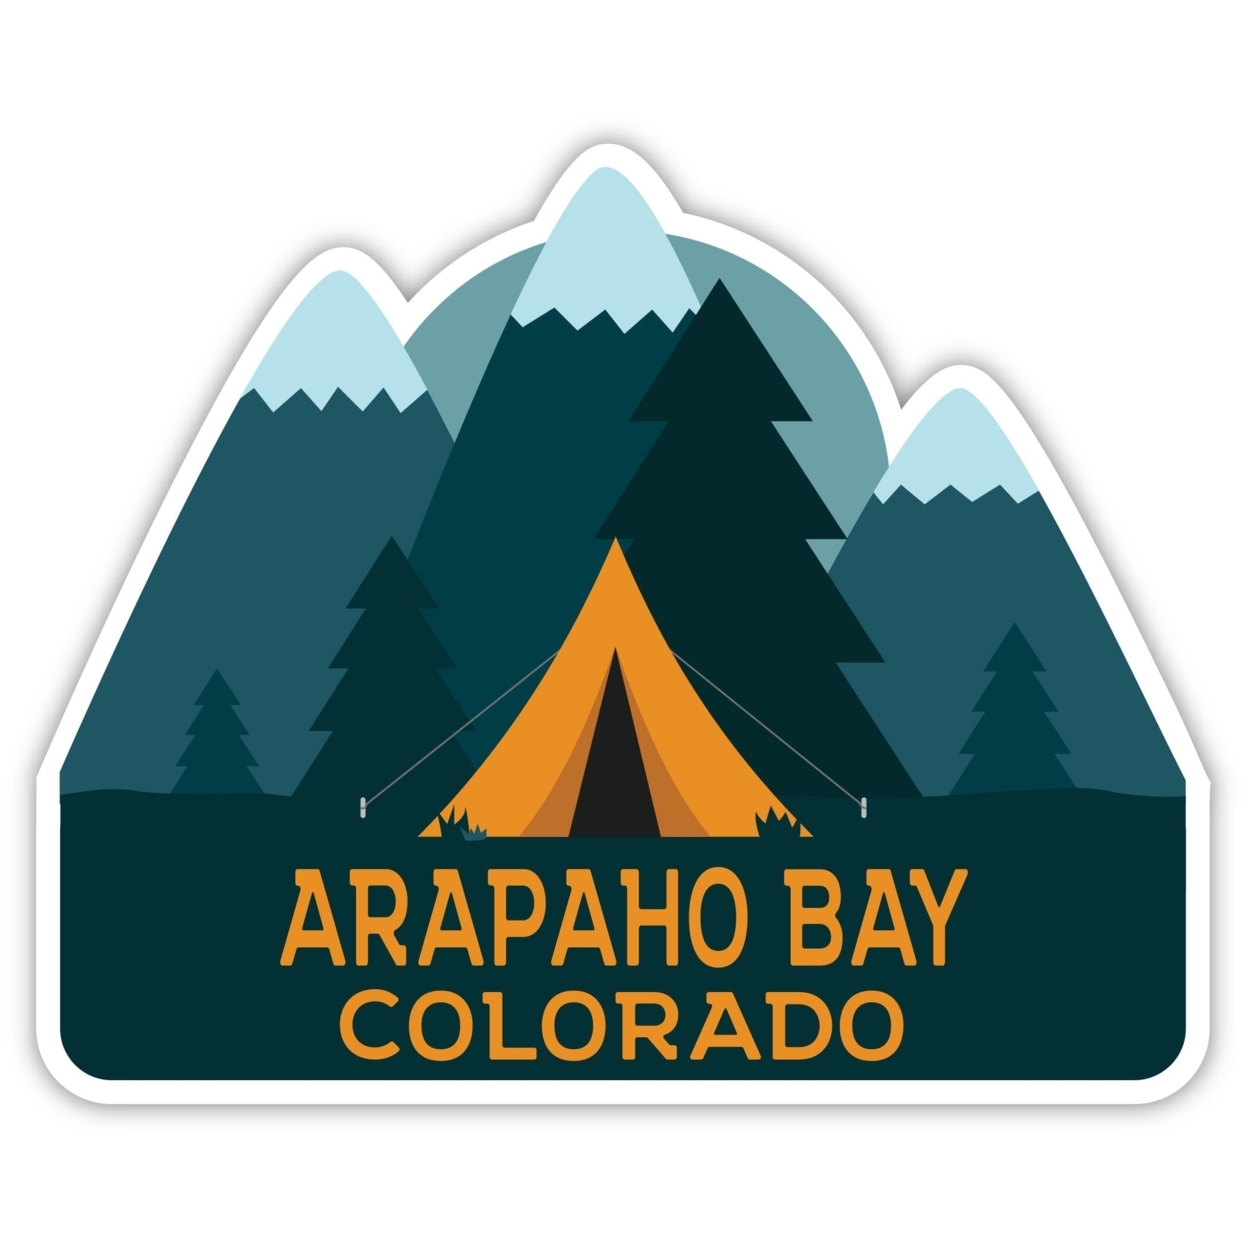 Arapaho Bay Colorado Souvenir Decorative Stickers (Choose Theme And Size) - 4-Pack, 2-Inch, Tent